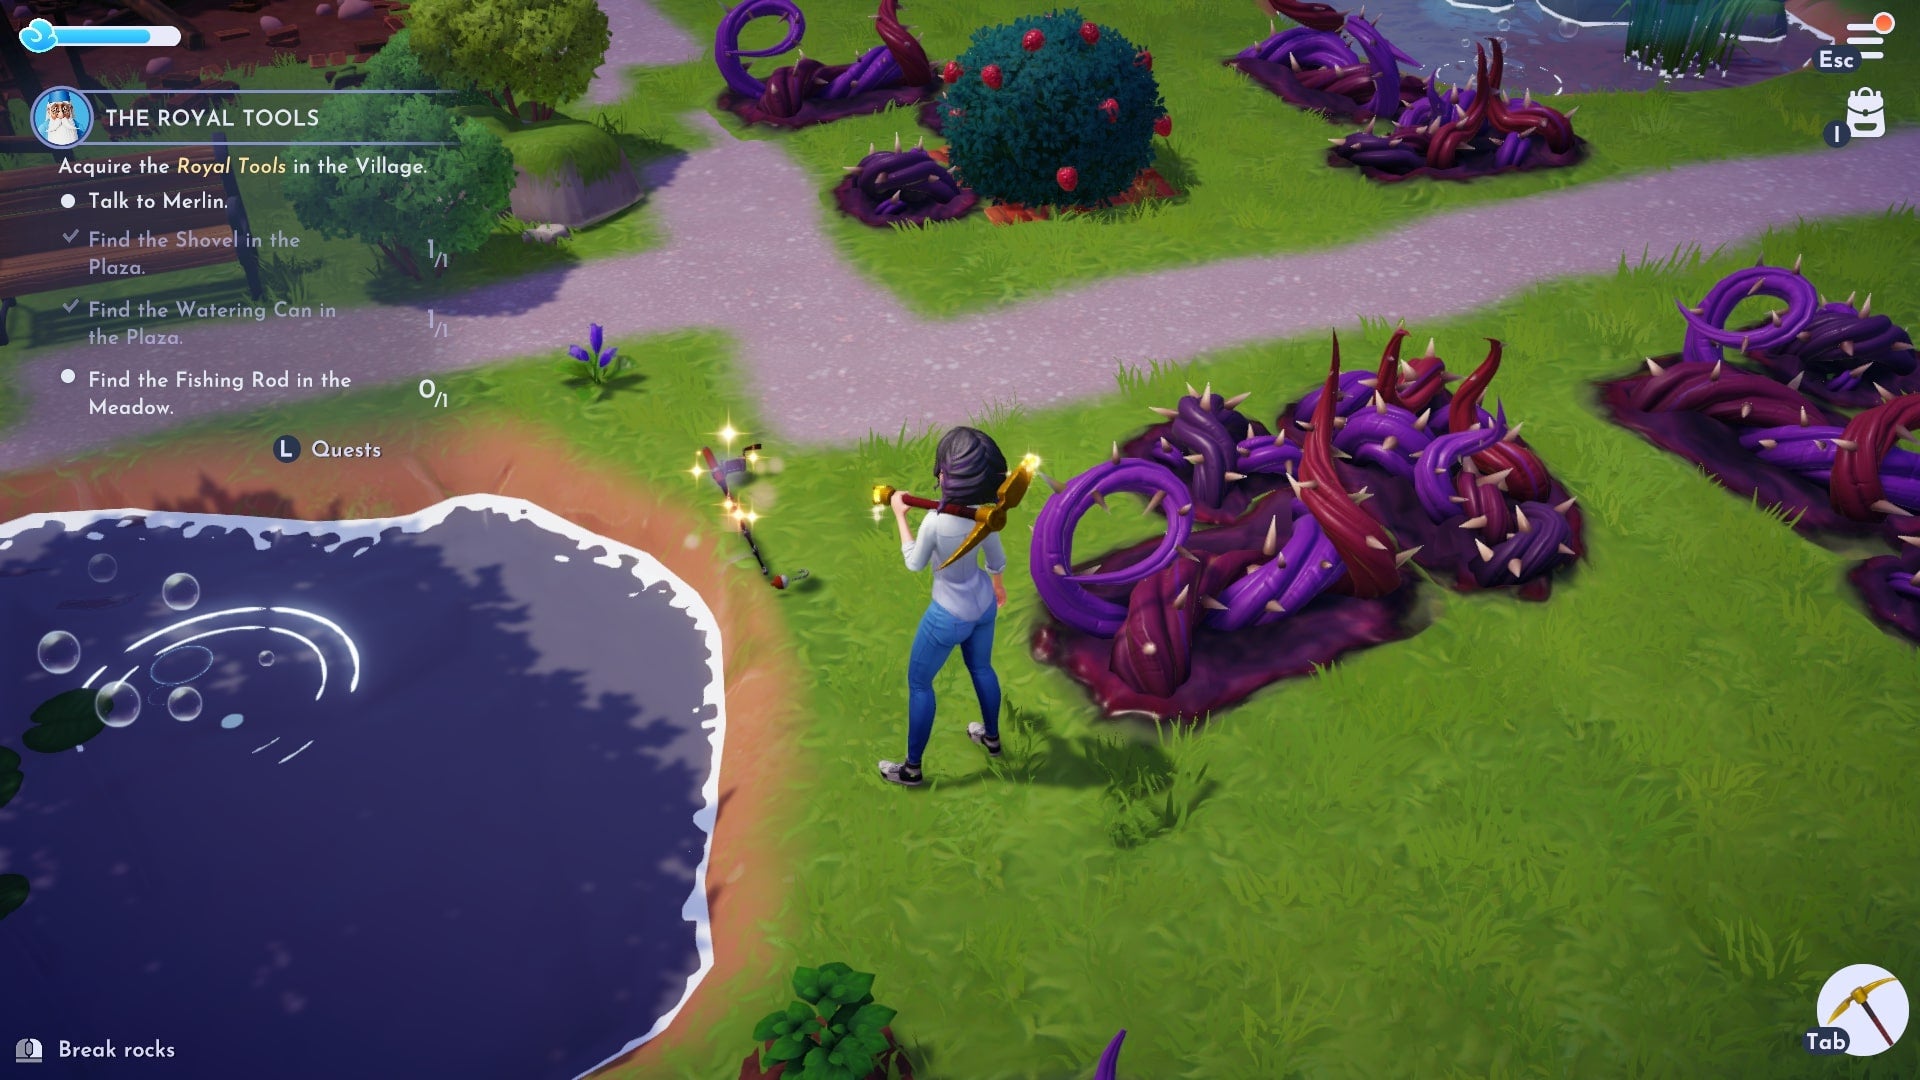 A player looks at the broken Fishing Rod Royal Tool in Peaceful Meadow of Disney Dreamlight Valley